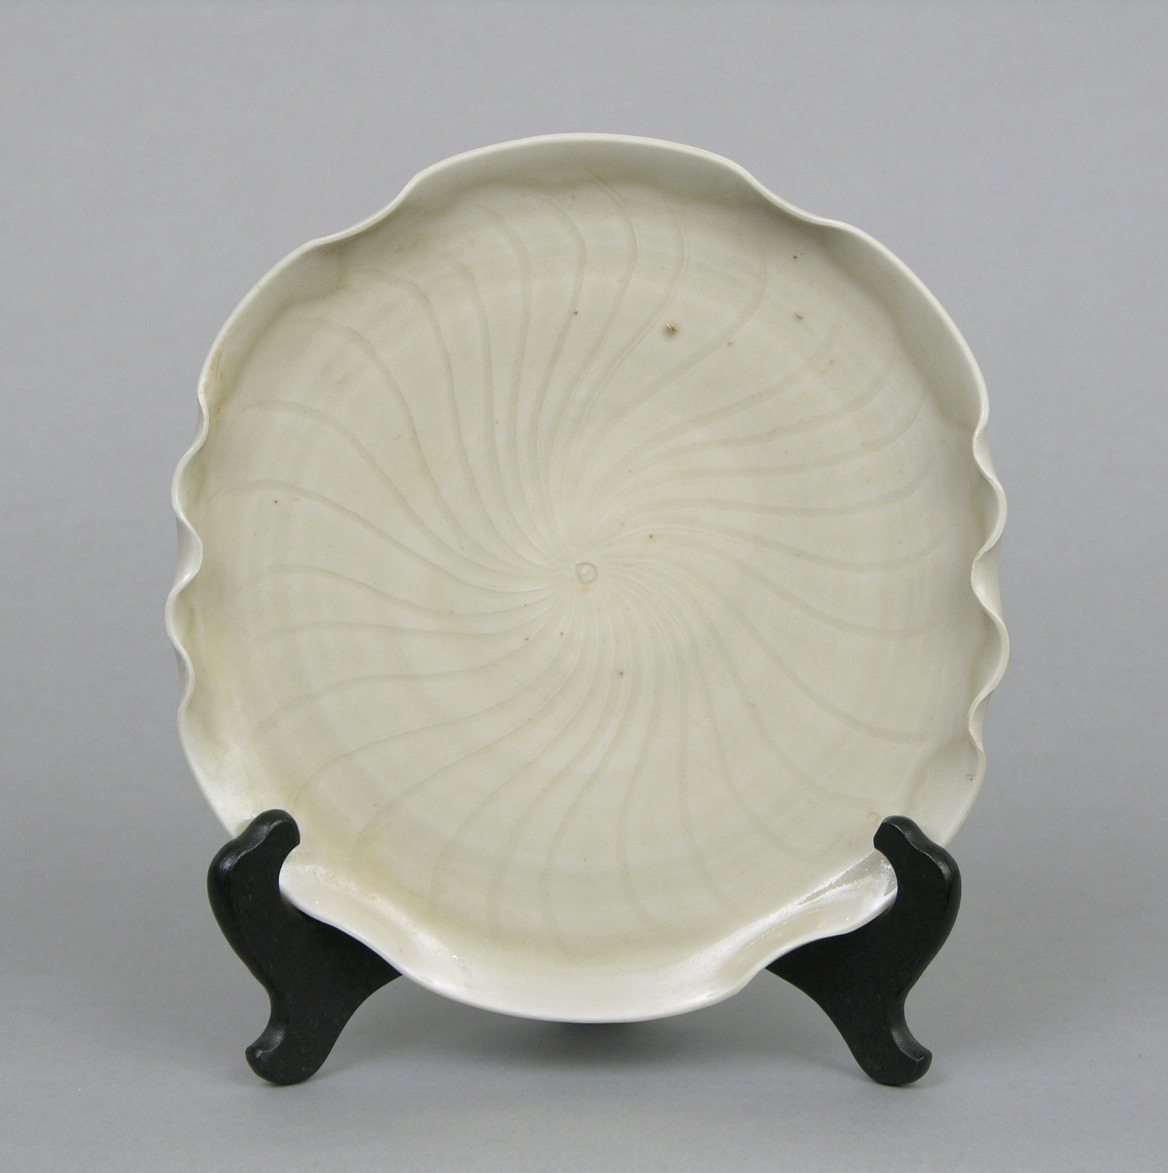 A Song Style Glazed Porcelain Plate , 05.17.08, Sold 115